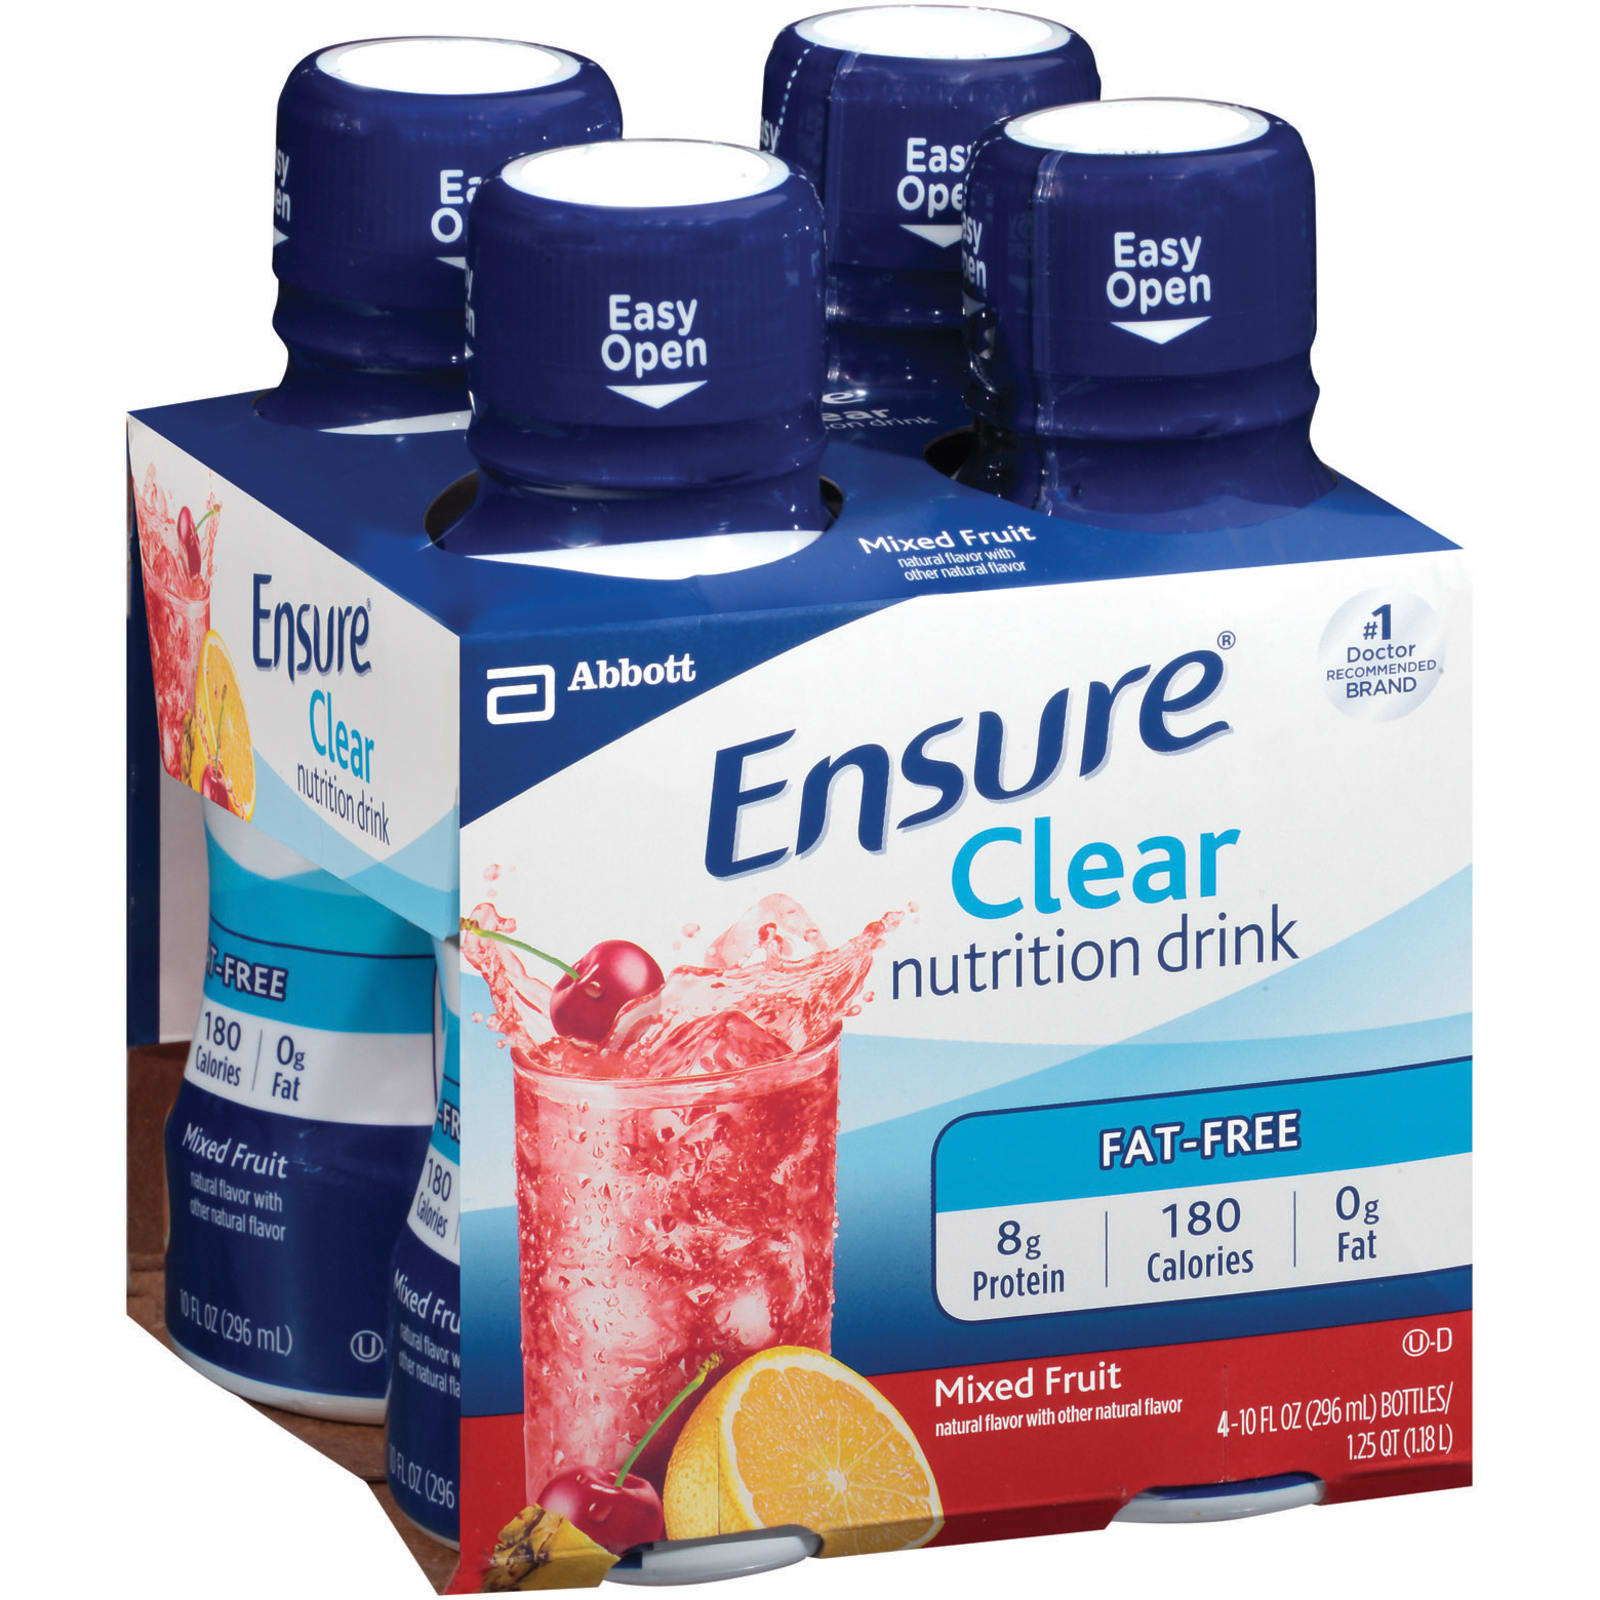 Ensure Clear Nutrition Drink Mixed Fruit - Shop Diet & Fitness at H-E-B